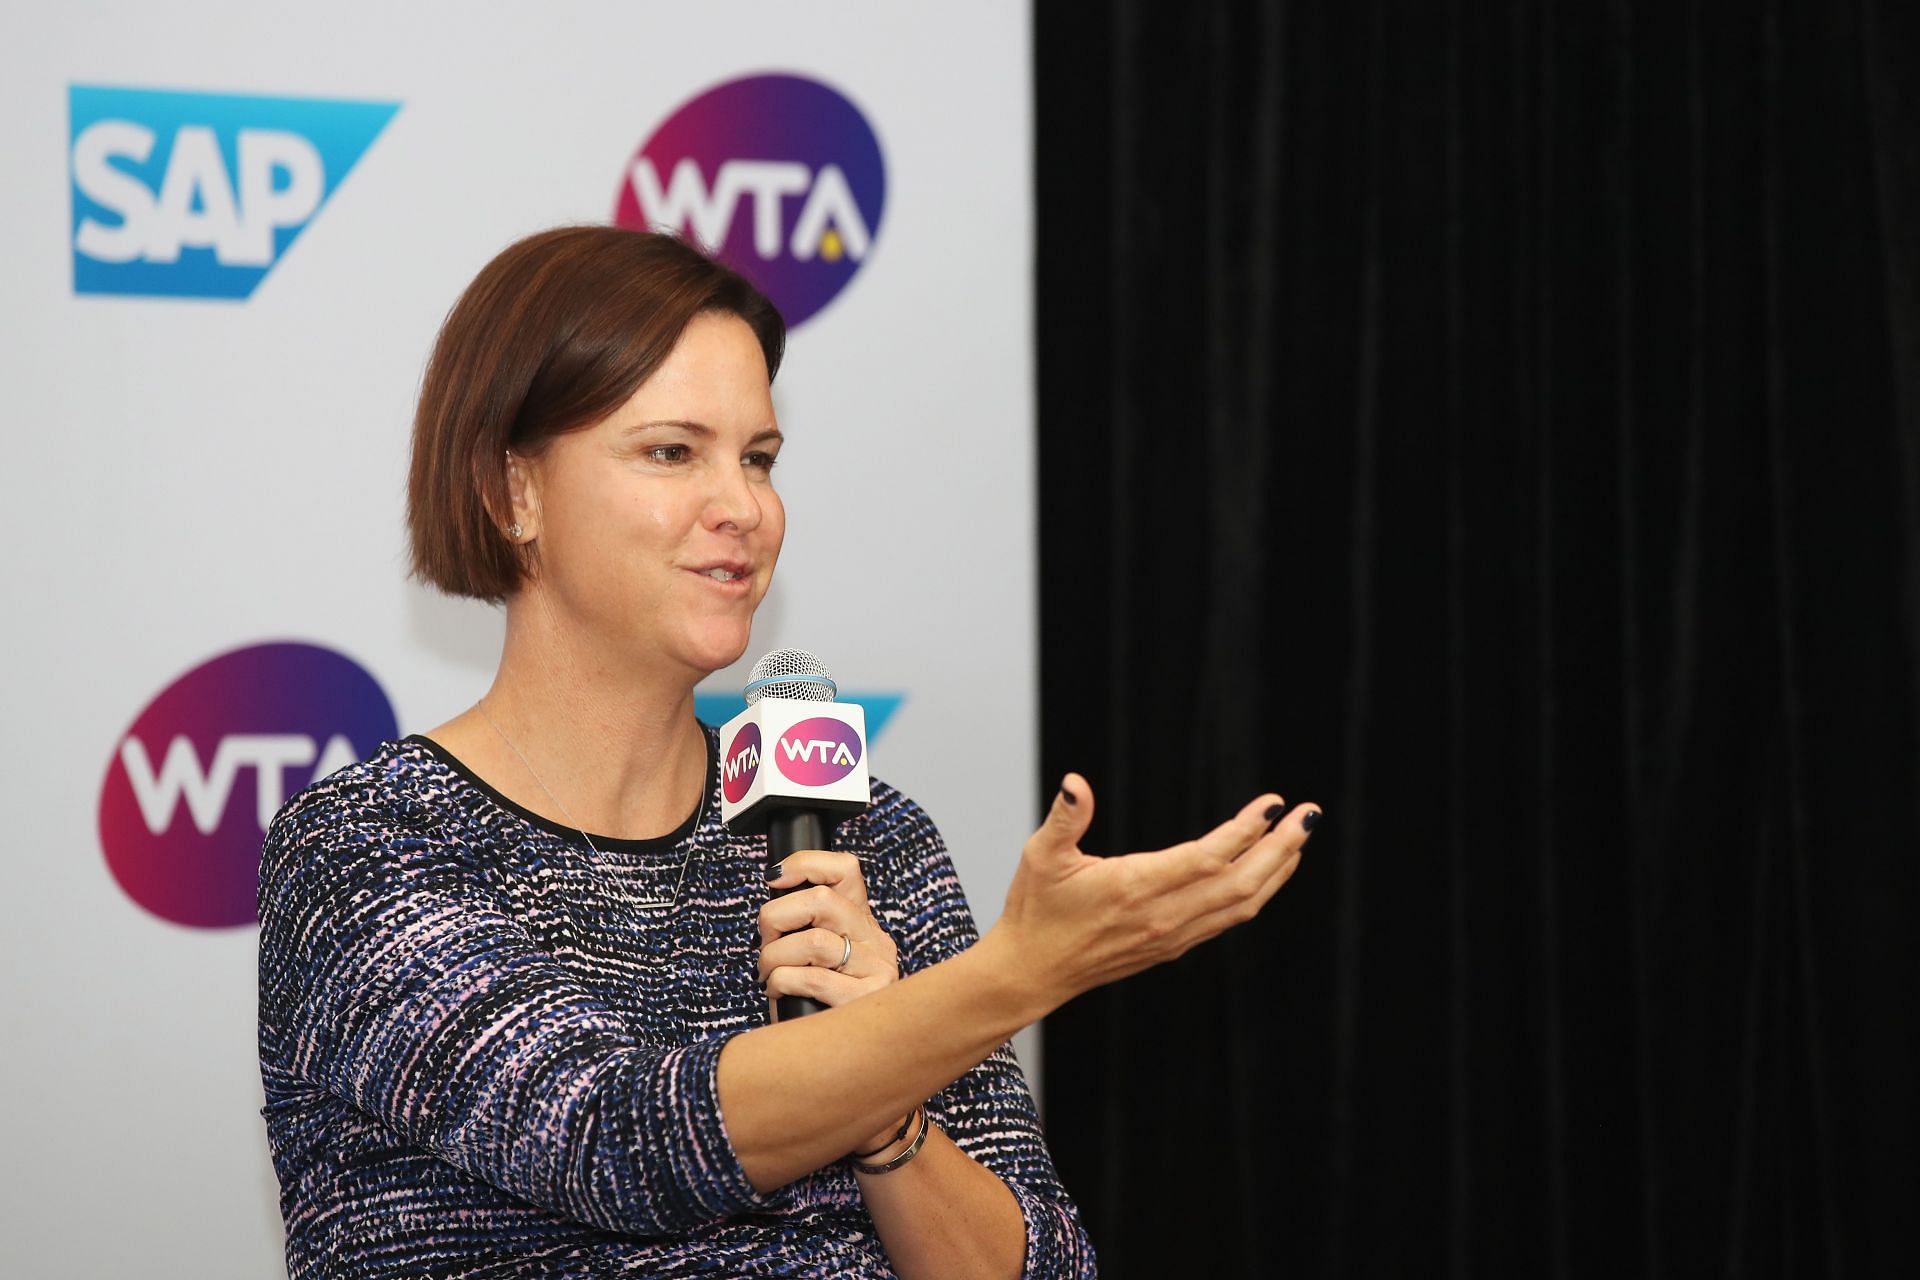 Lindsay Davenport interacts with the media as WTA Finals Legend ambassador in 2017.